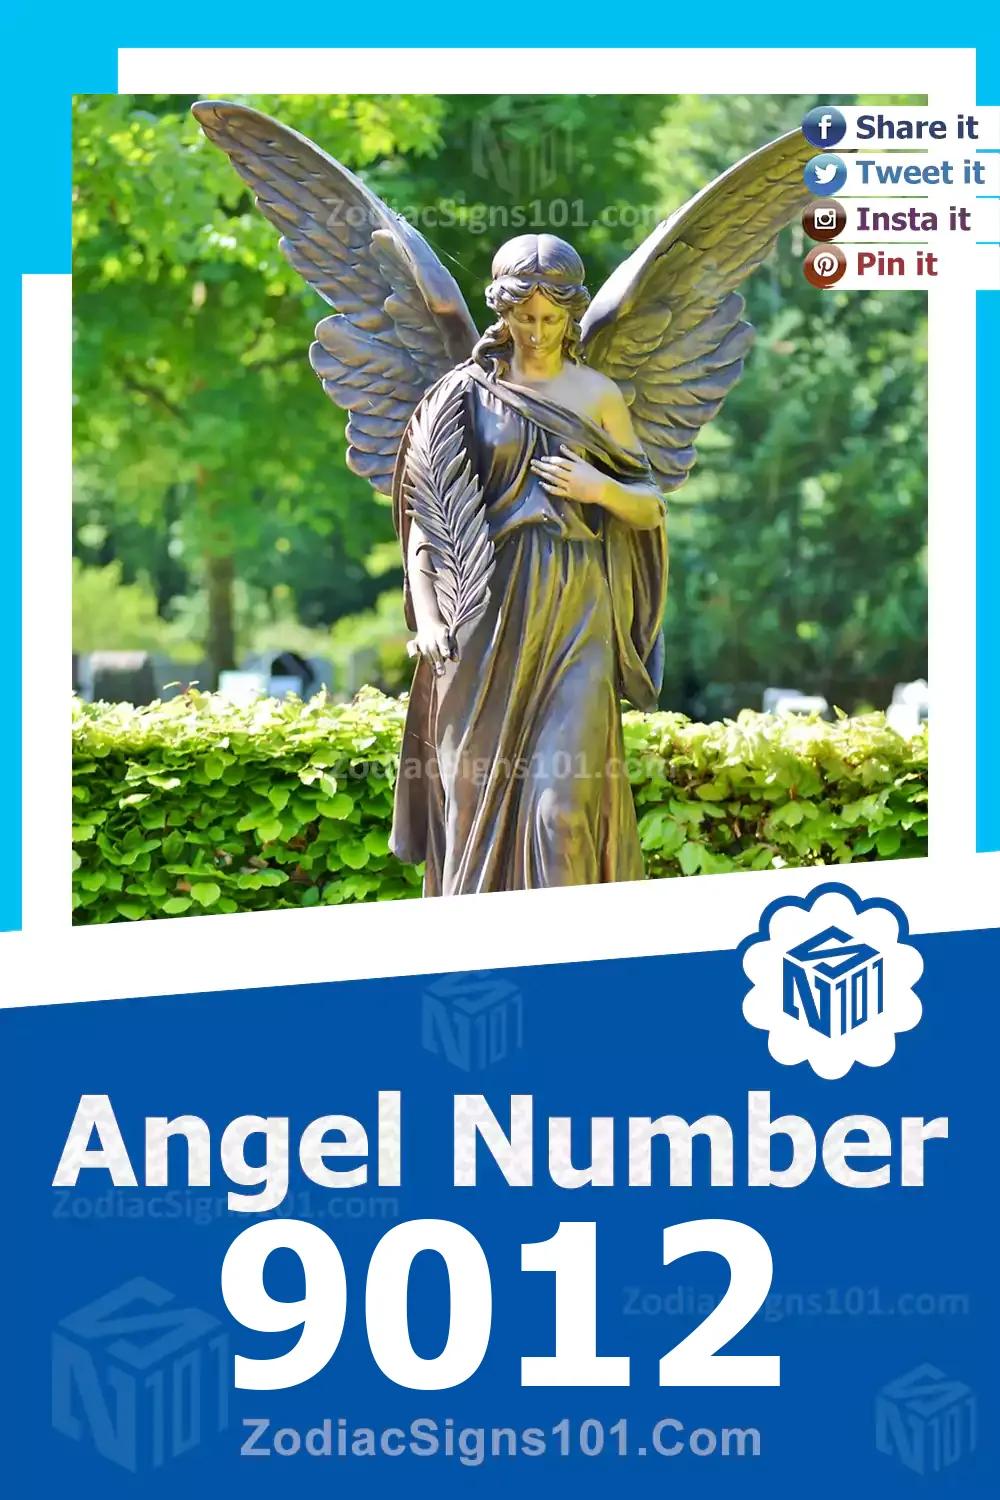 9012 Angel Number Meaning